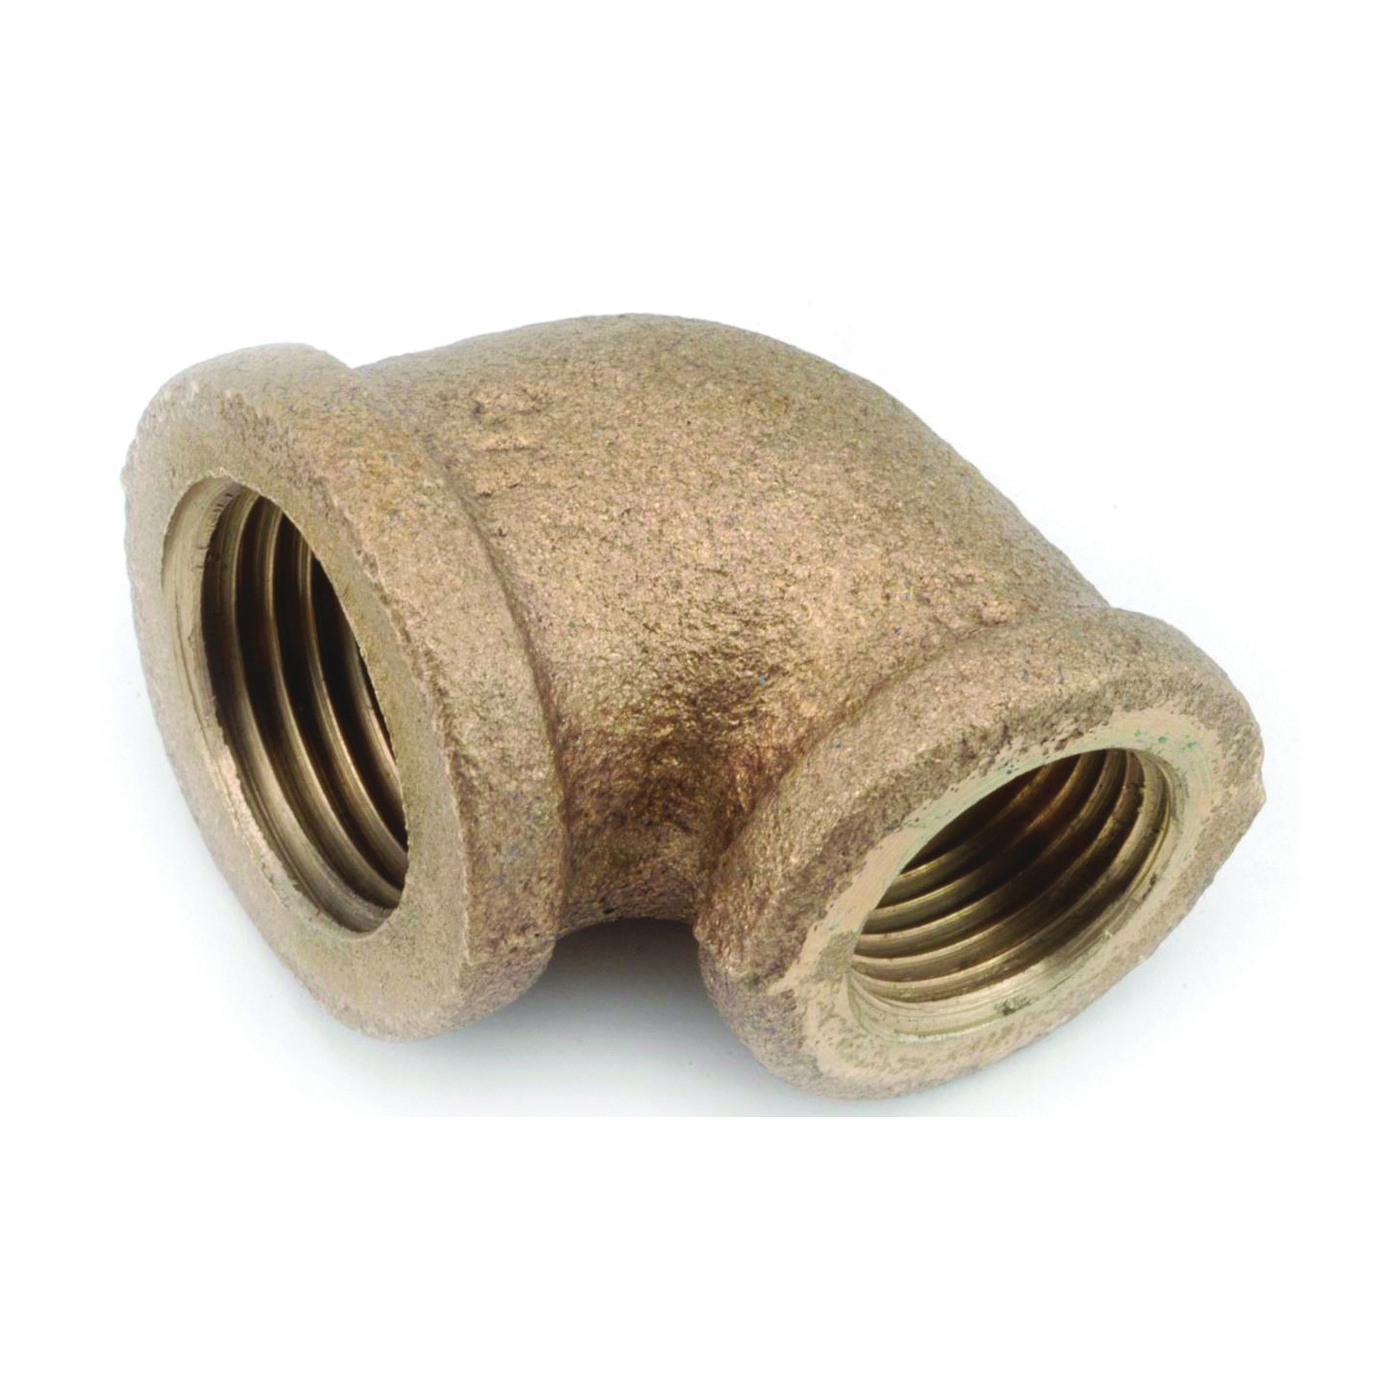 738105-1208 Reducing Pipe Elbow, 3/4 x 1/2 in, FIP, 90 deg Angle, Brass, 200 psi Pressure